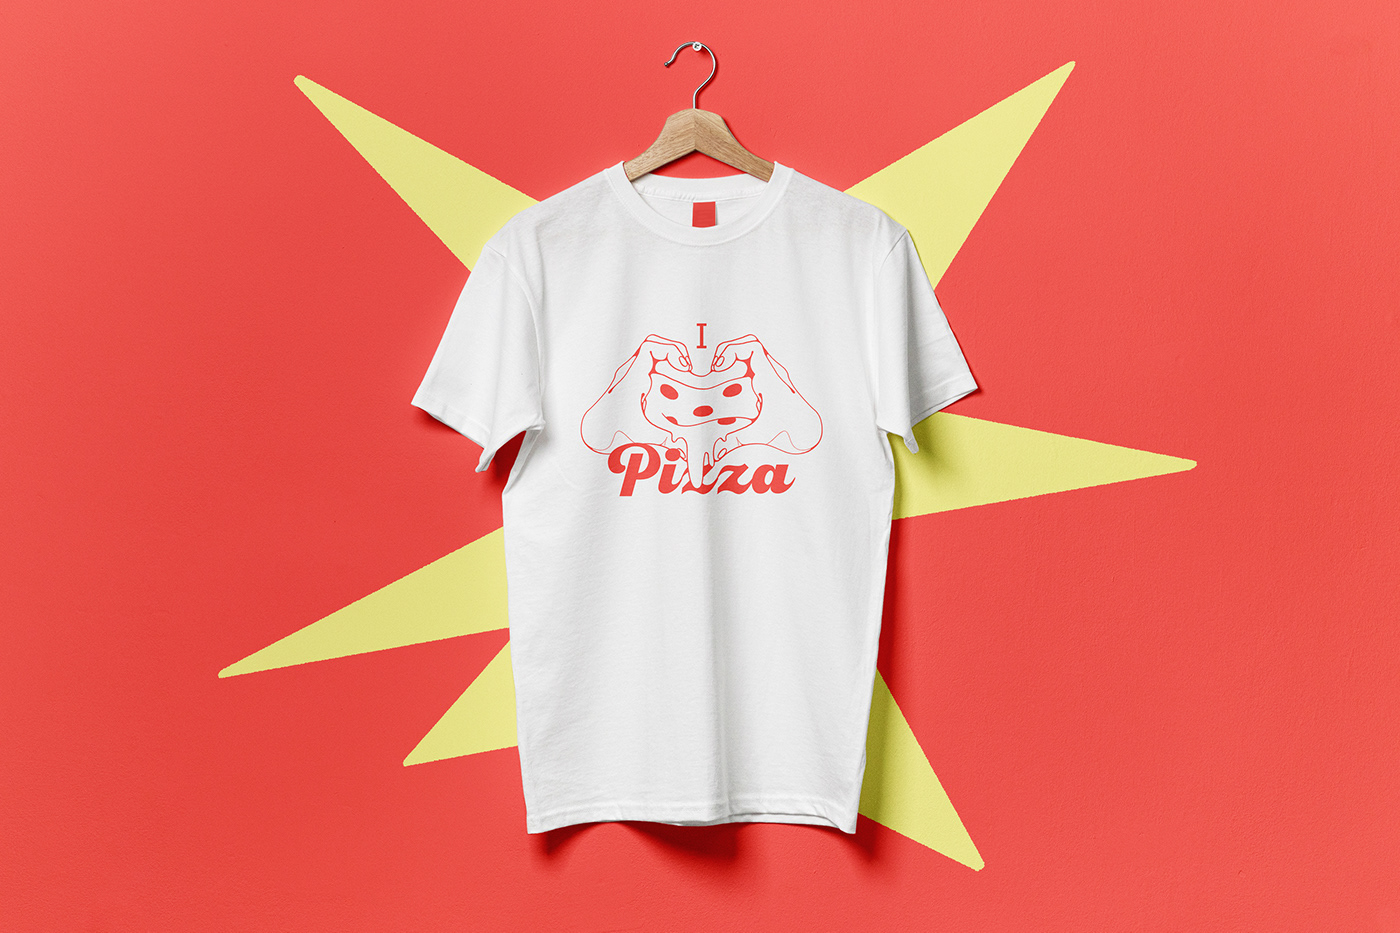 Illustration of a shirt print for a pizza brand